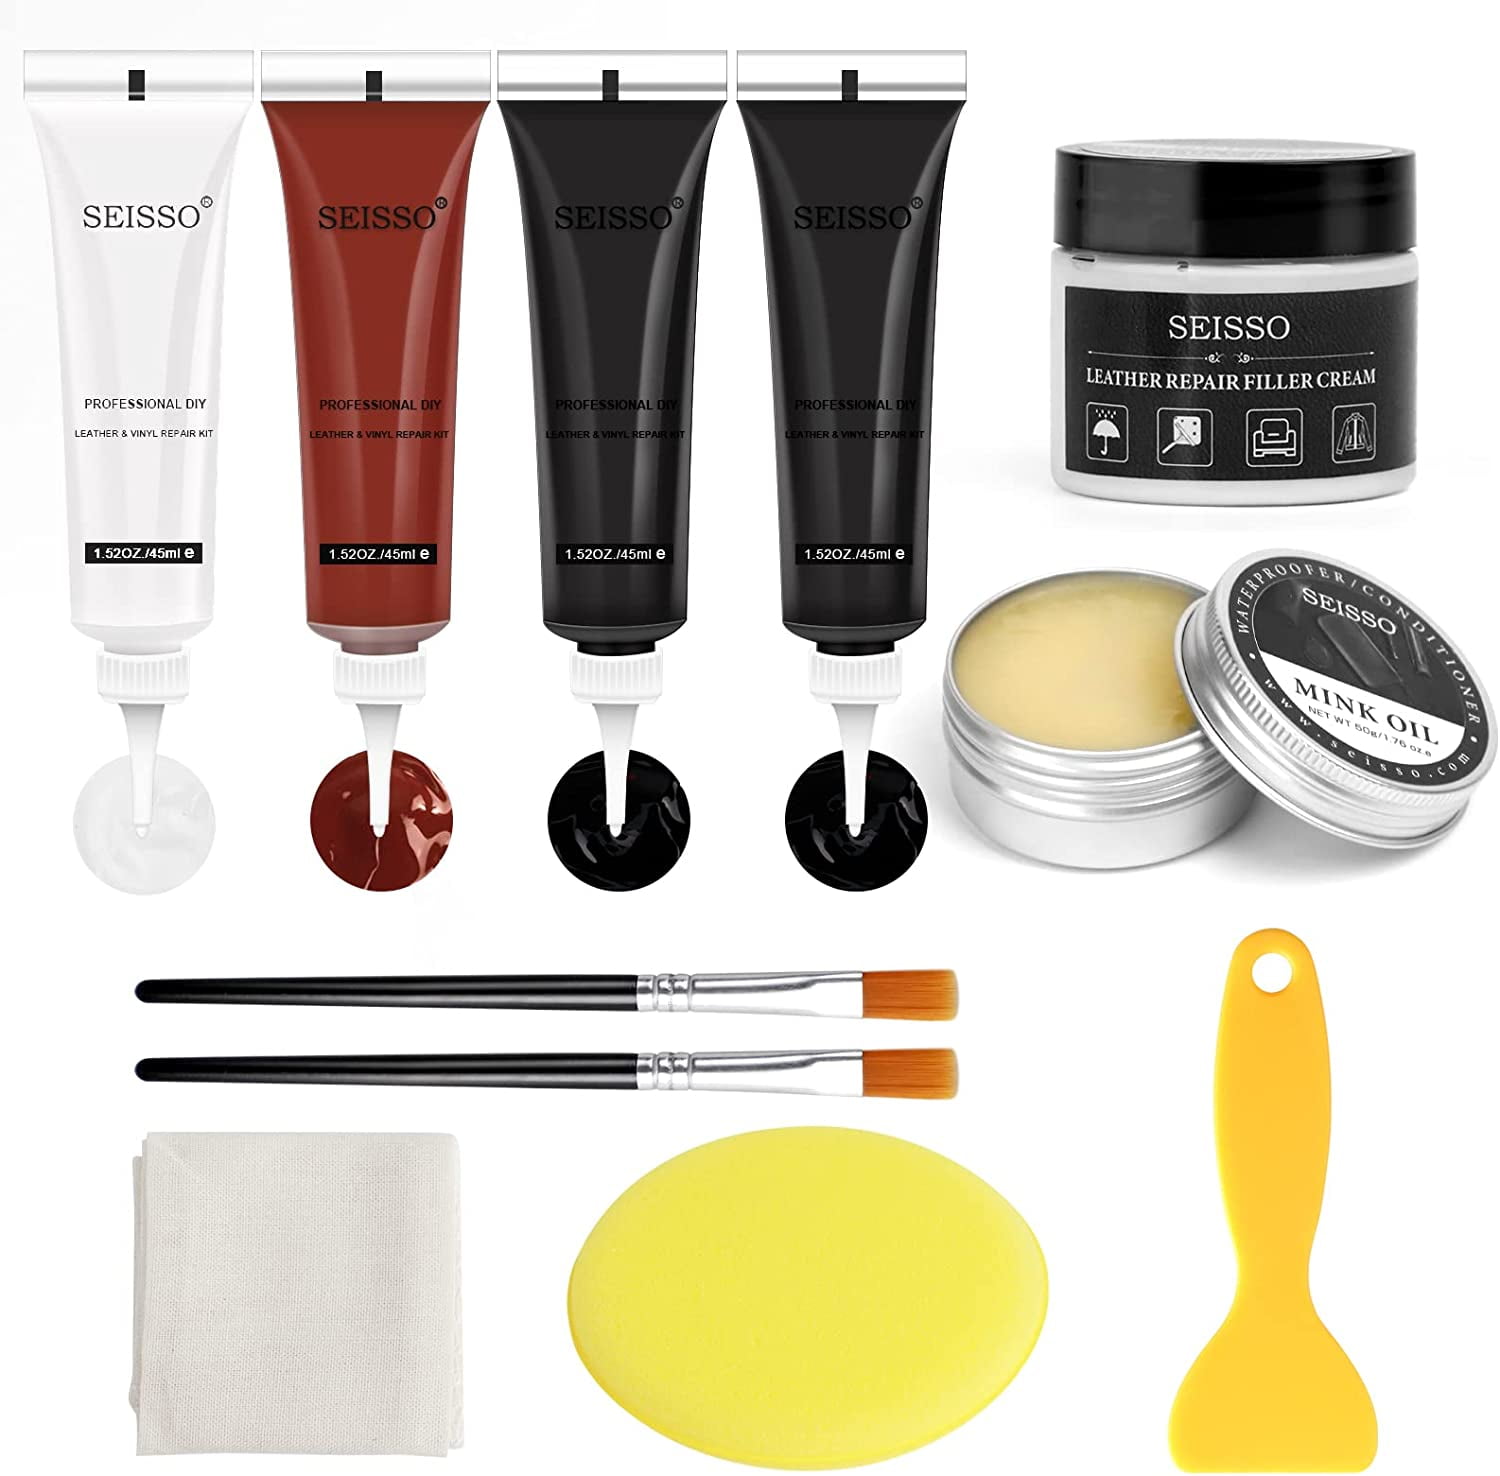 SEISSO Leather and Vinyl Repair Kit for Furniture, Leather Dye with Mink  Oil, Leather Repair Filler Cream,Leather Furniture, Couch, Car Seats, Sofa,  Jacket Restoring Touch up 